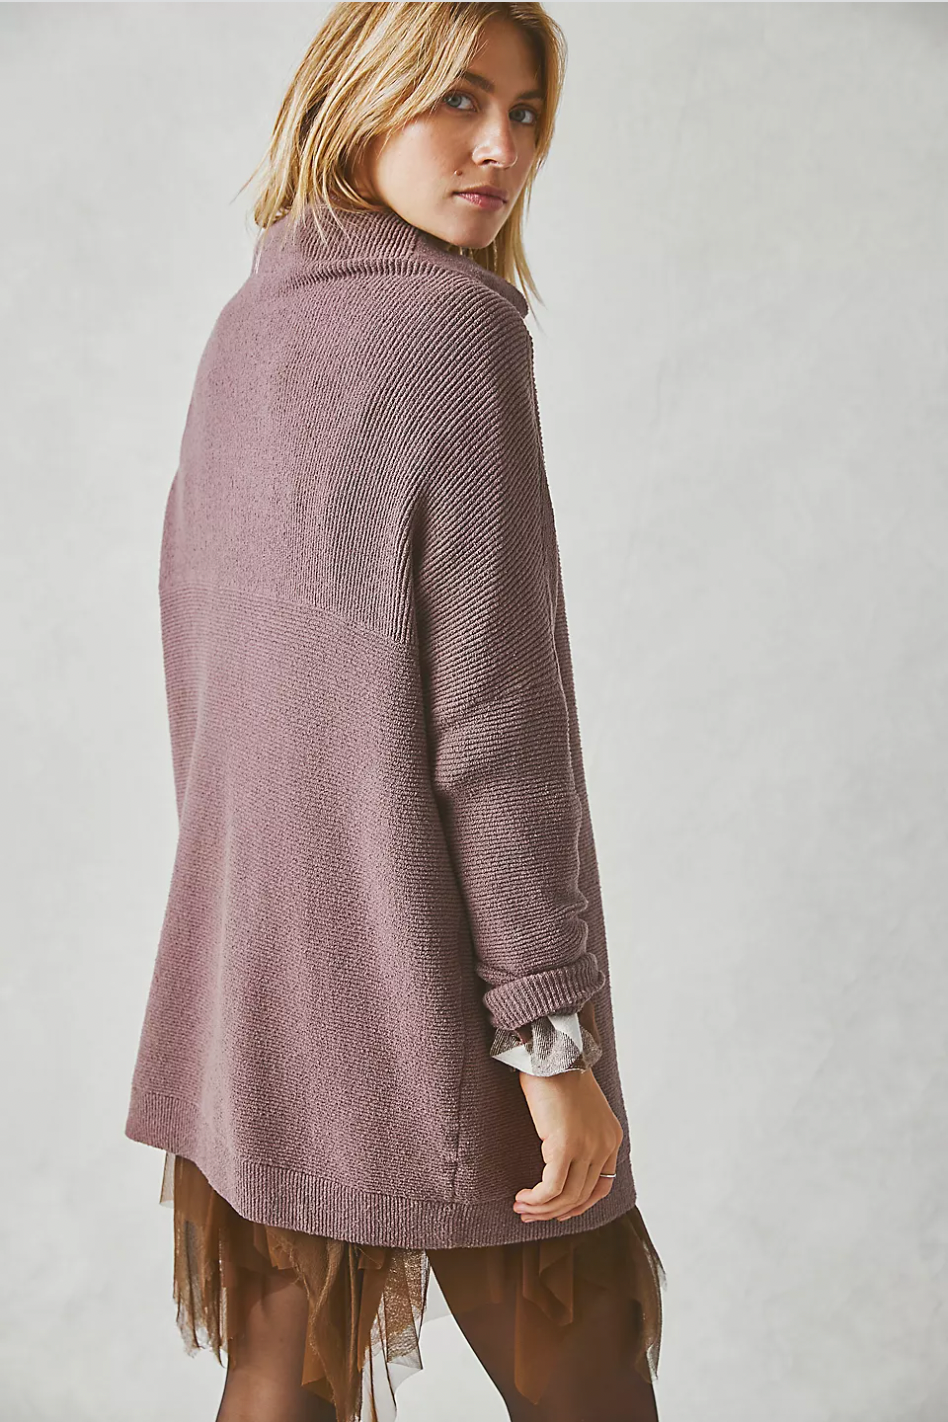 Photo of model wearing Ottoman Slouchy Tunic in the colour Nutmeg from Free People available at UniKoncept in Waterloo